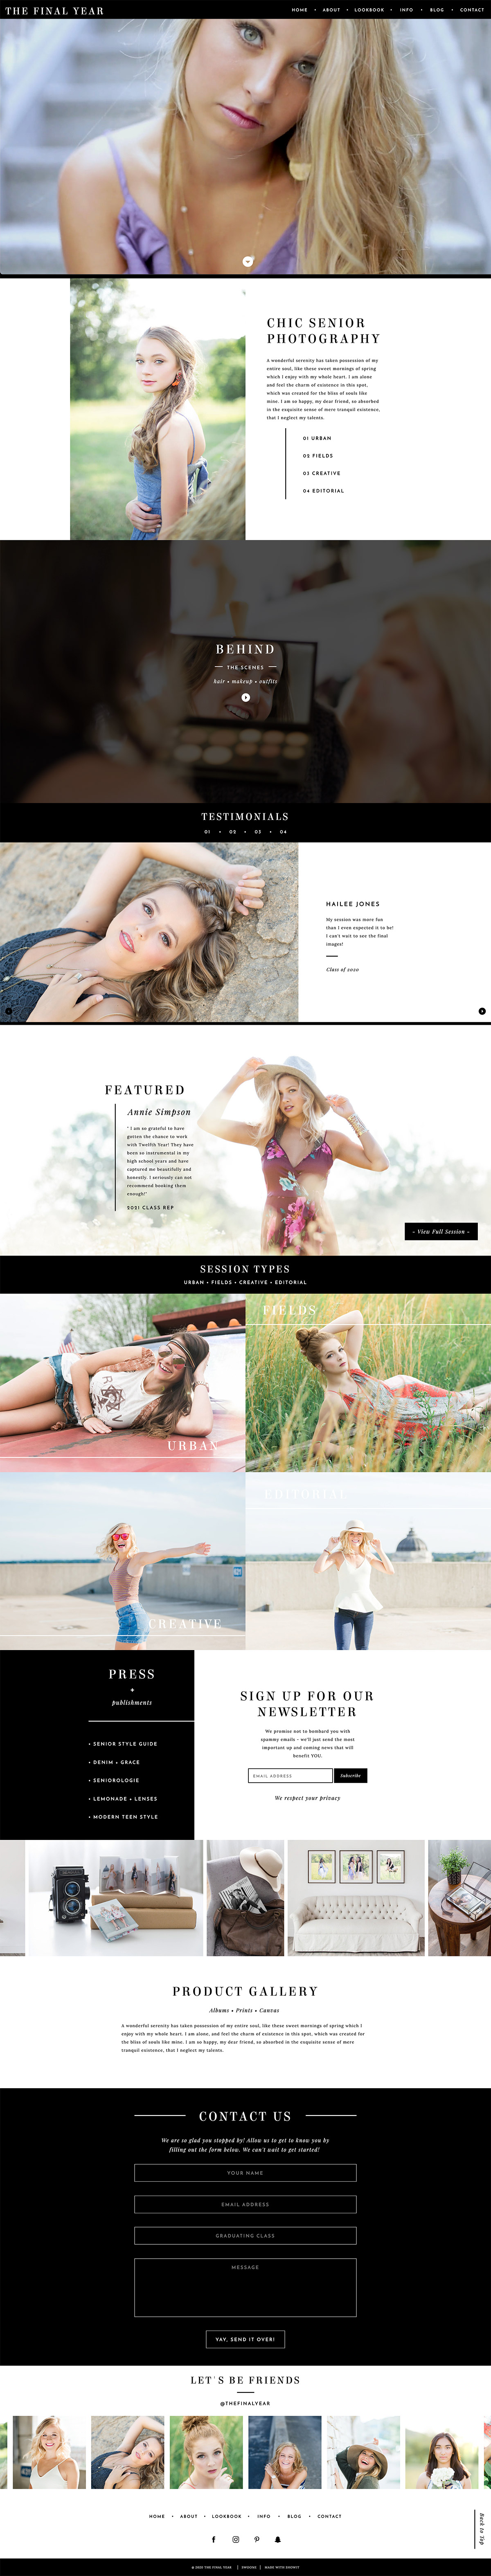 Premium Showit Template - The Final Year